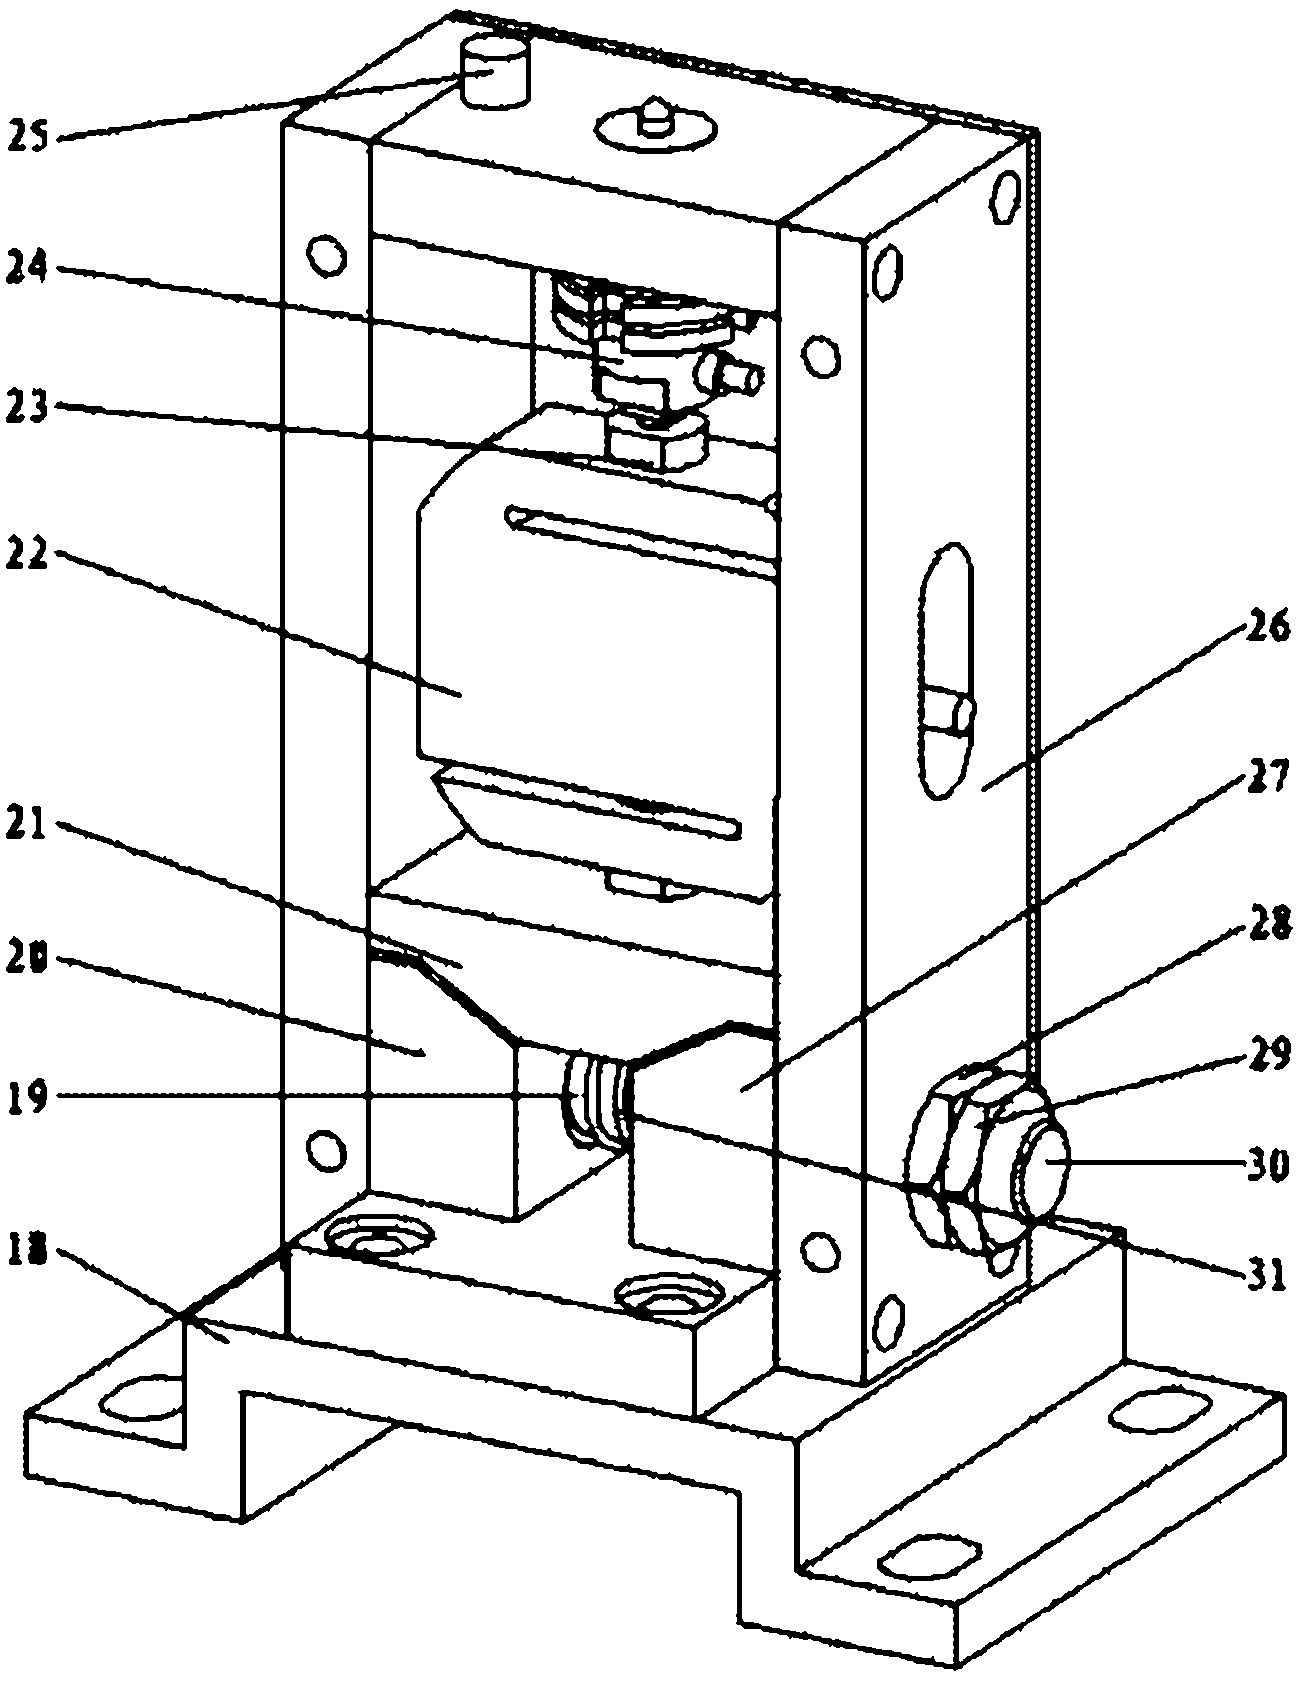 Dynamic loading device for high-speed motorized spindle